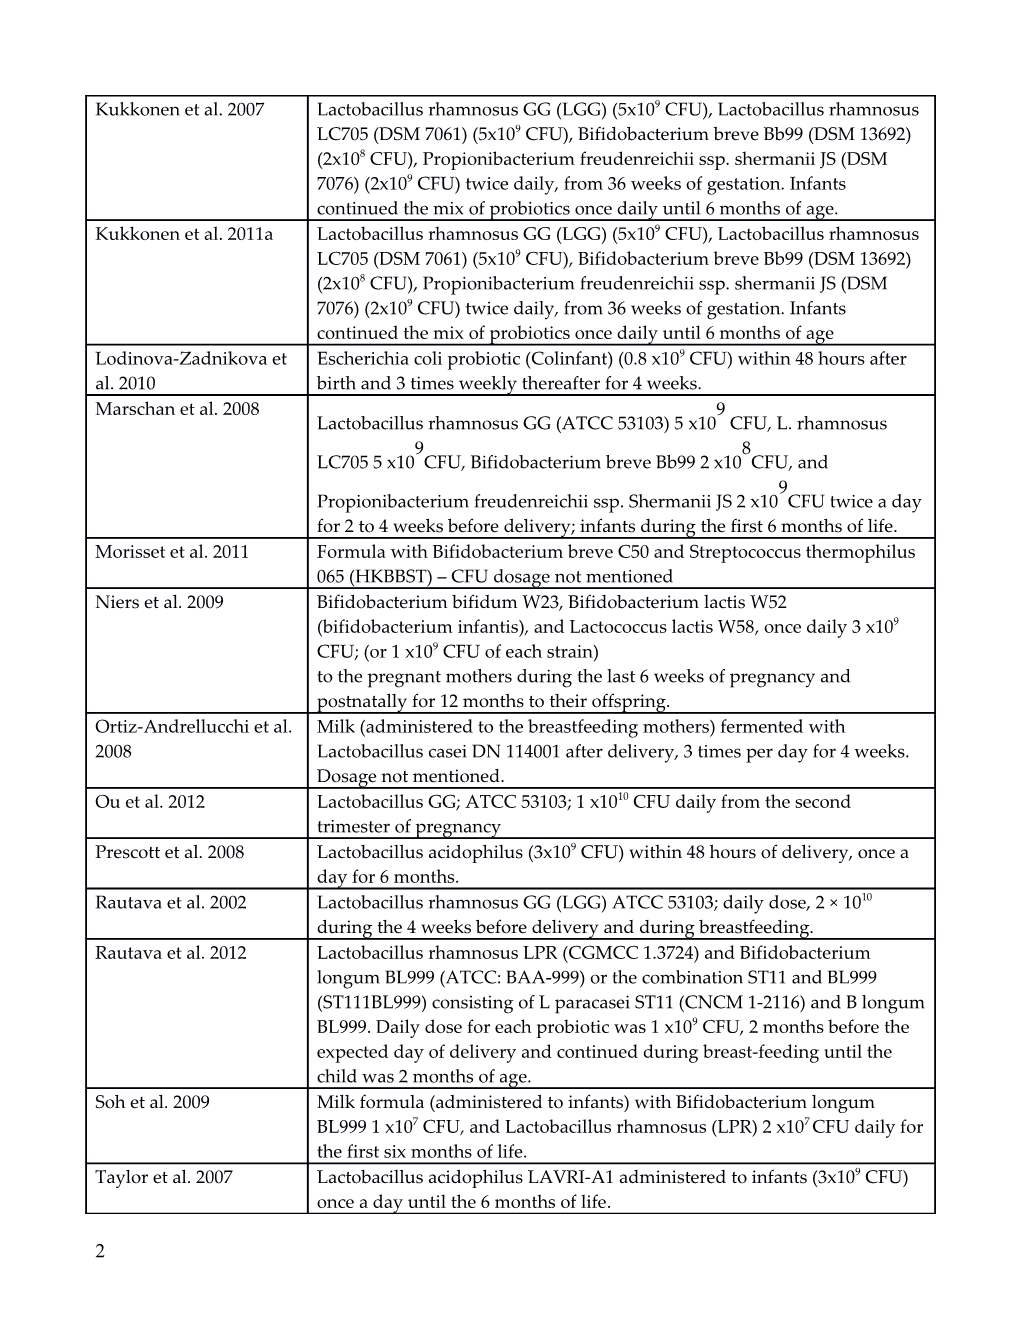 Additional File3. Probiotic Strains and Dosages Used in the Included Studies